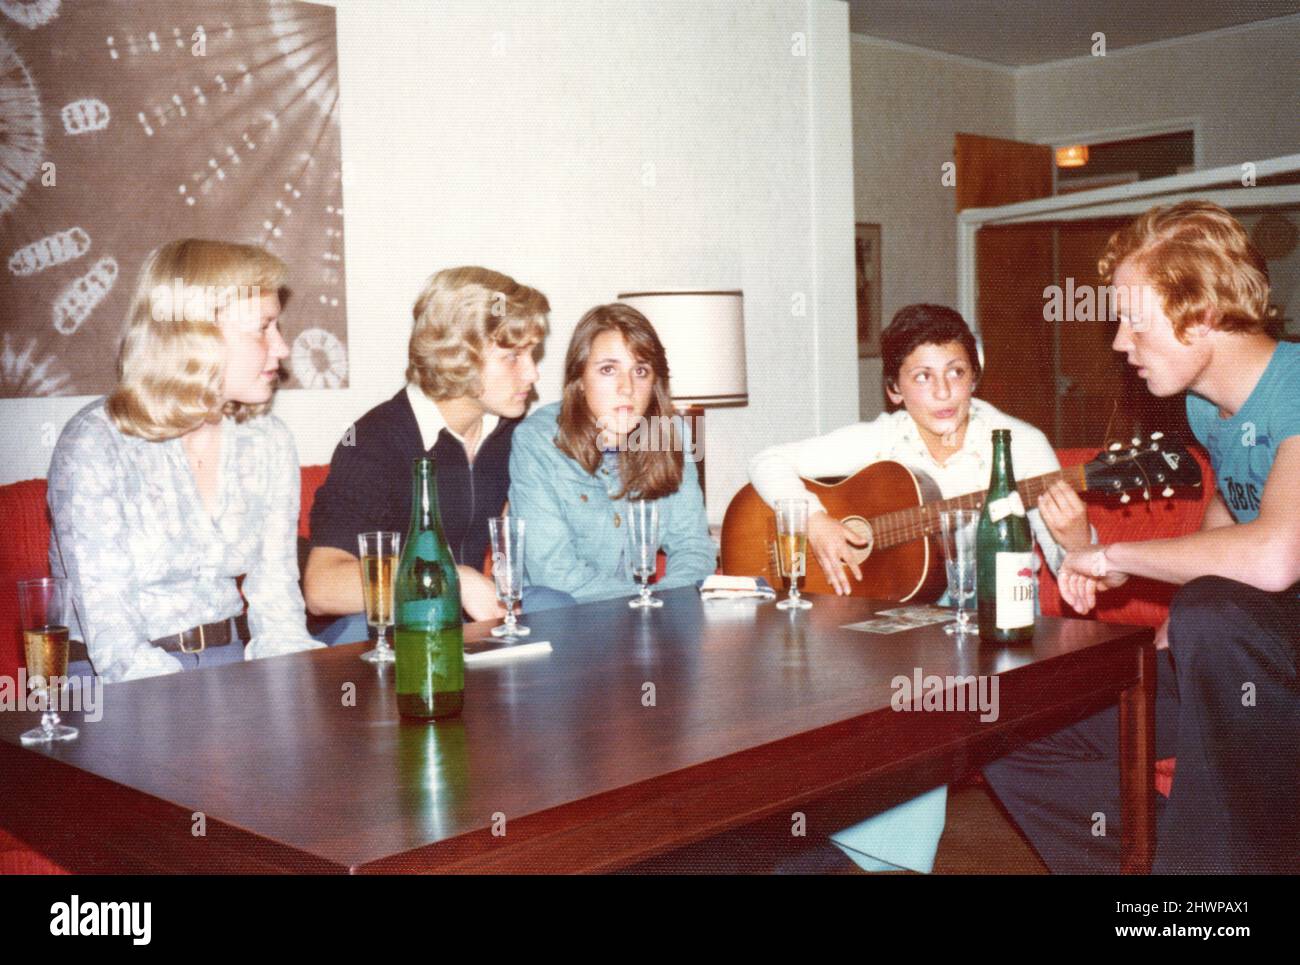 1970's original photograph of group of Swedish teenagers talking, drinking and playing guitar, Sweden. Concept of friendship, togetherness, nostalgia Stock Photo